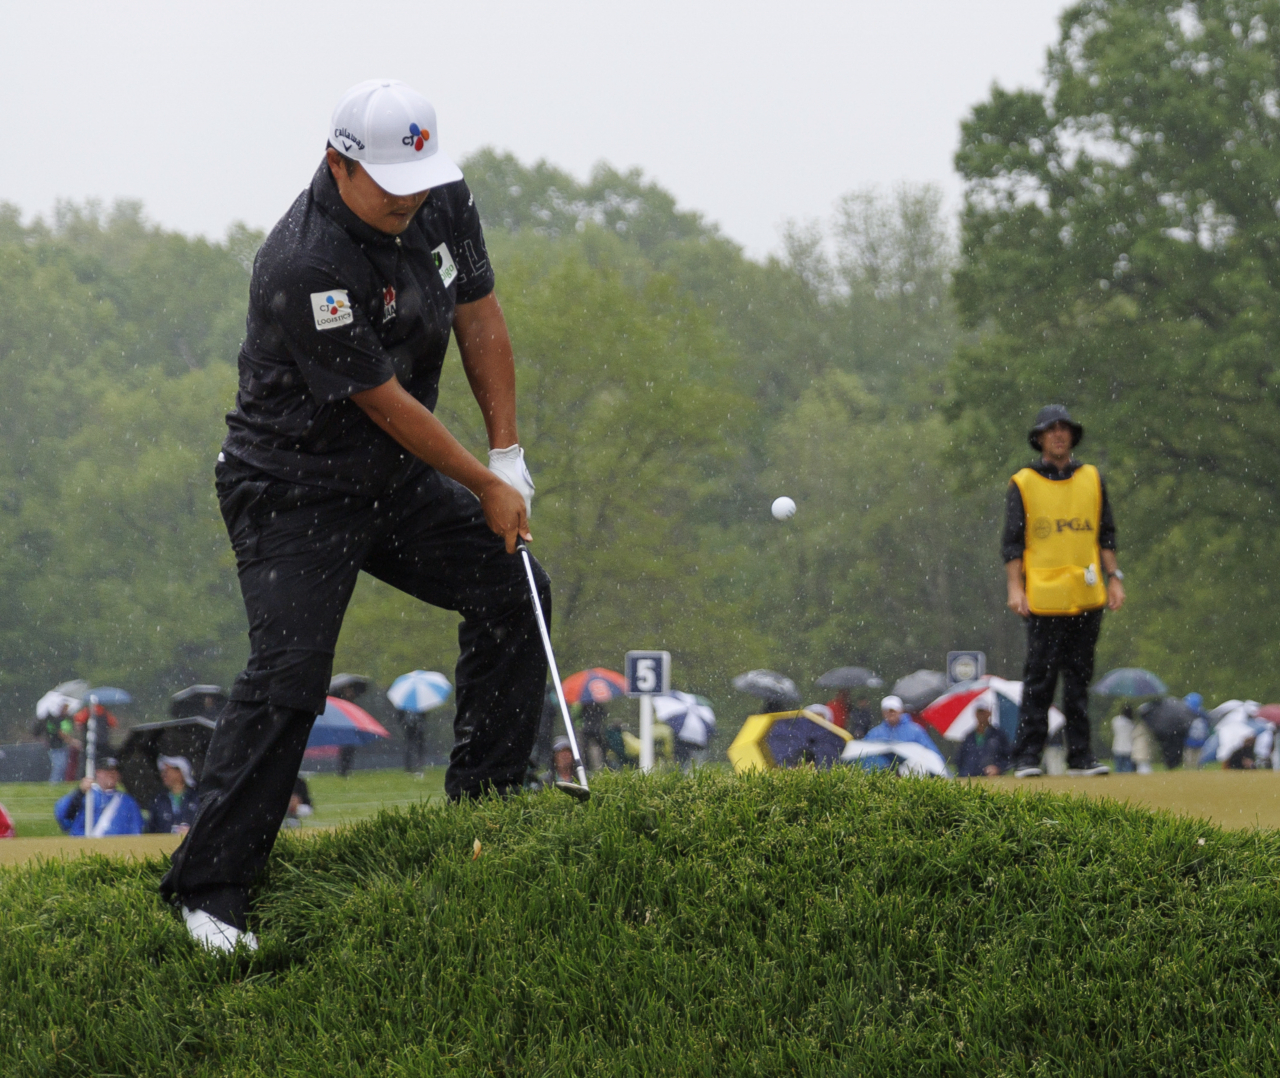 Lee Kyoung-hoon of South Korea hits a chip shot toward the fifth green during the third round of the PGA Championship on the East Course at Oak Hill Country Club in Pittsford, New York, on Saturday. (EPA)